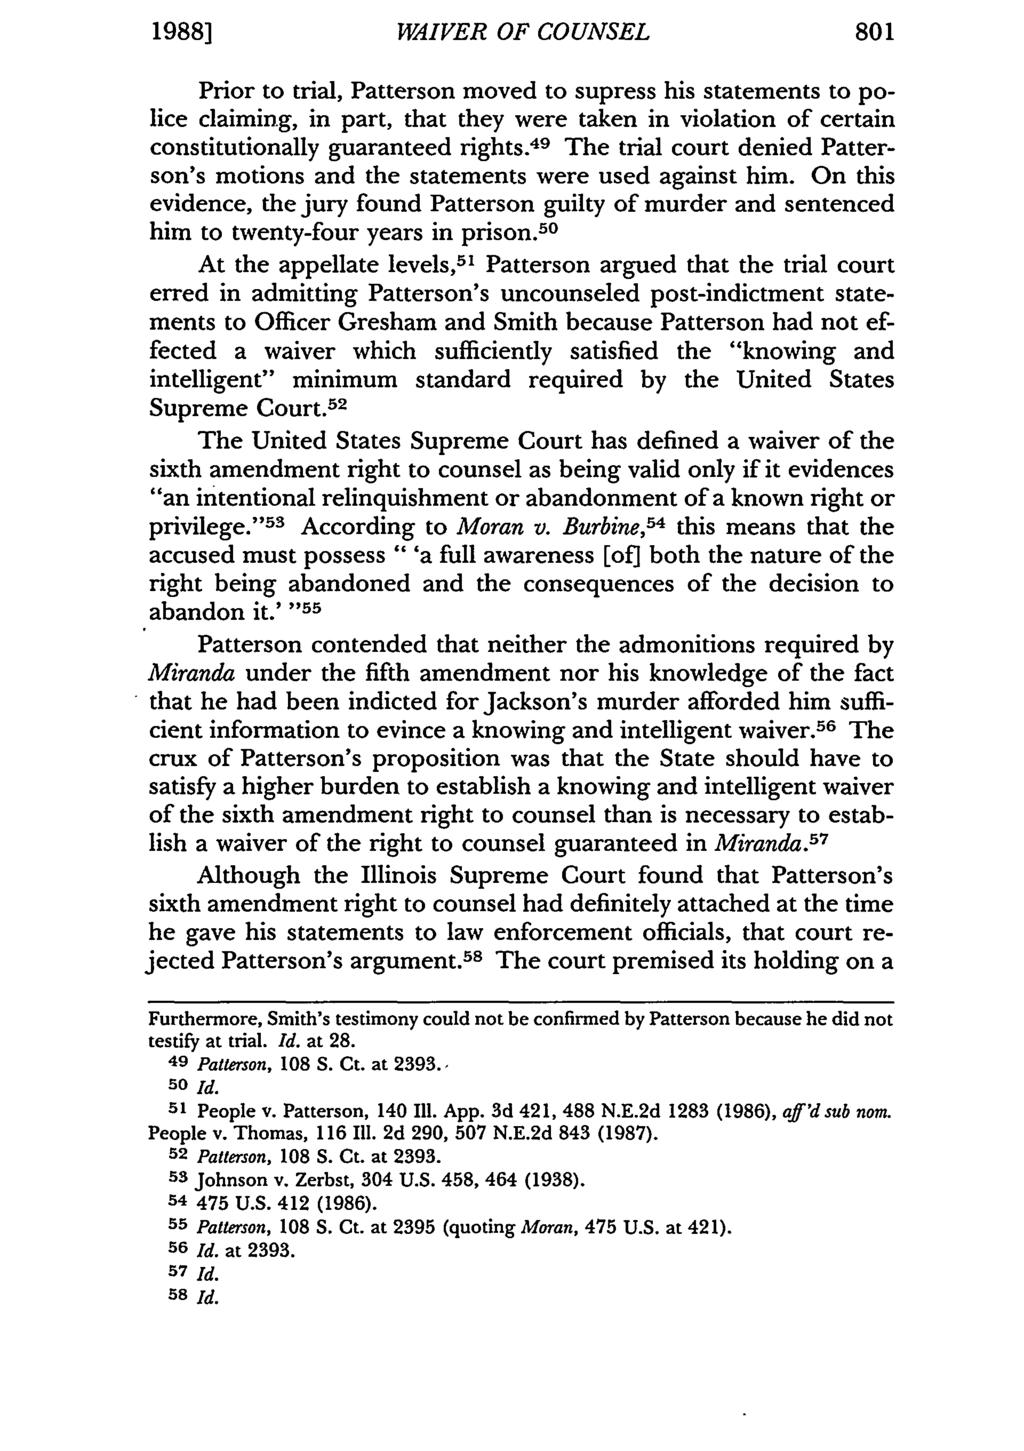 19881 WAIVER OF COUNSEL Prior to trial, Patterson moved to supress his statements to police claiming, in part, that they were taken in violation of certain constitutionally guaranteed rights.